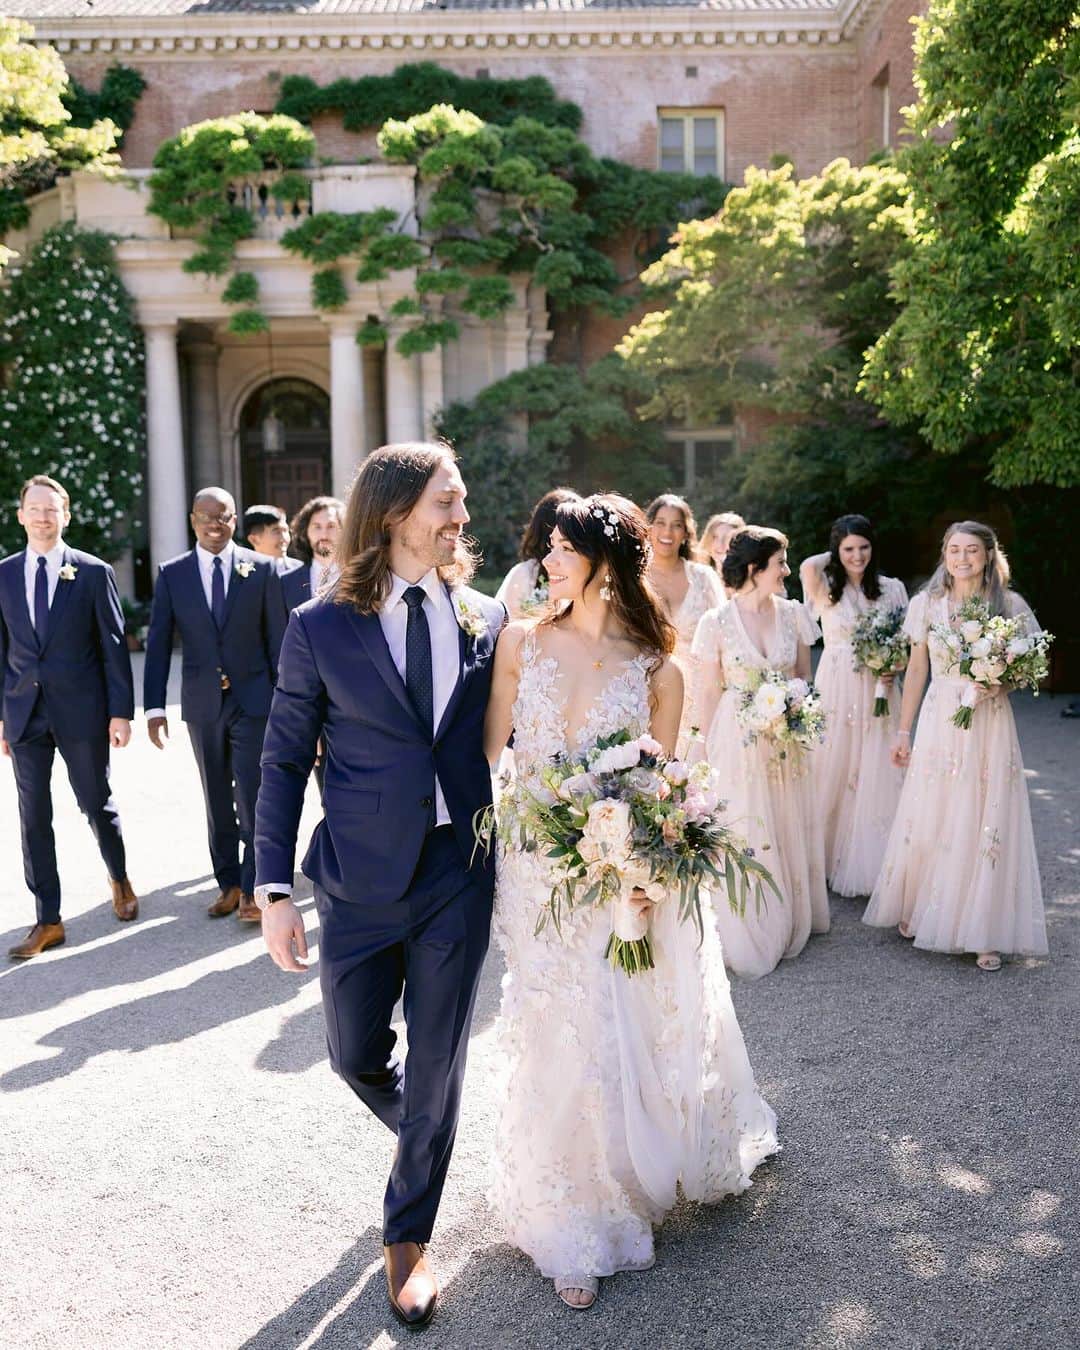 Ceci Johnsonのインスタグラム：「POV when @_filoli is transformed into the most whimsical fairytale #gardenwedding!!! . Design + Planning: @coledrakeevents  . Production + Florals: @flowersbyedgar  . 📸: @larissaclevelandphoto  . Stationery: @cecinewyork  . Wardrobe concierge: @theweddingdetailor  . Catering: @paulaleduc  . DJ: @djbrianbofficial  . Makeup: @carriealdous  . Venue: #filoli  . #filoliwedding #filoligardens #filoliweddingphotographer #filoliweddingplanner #filoliflorist」